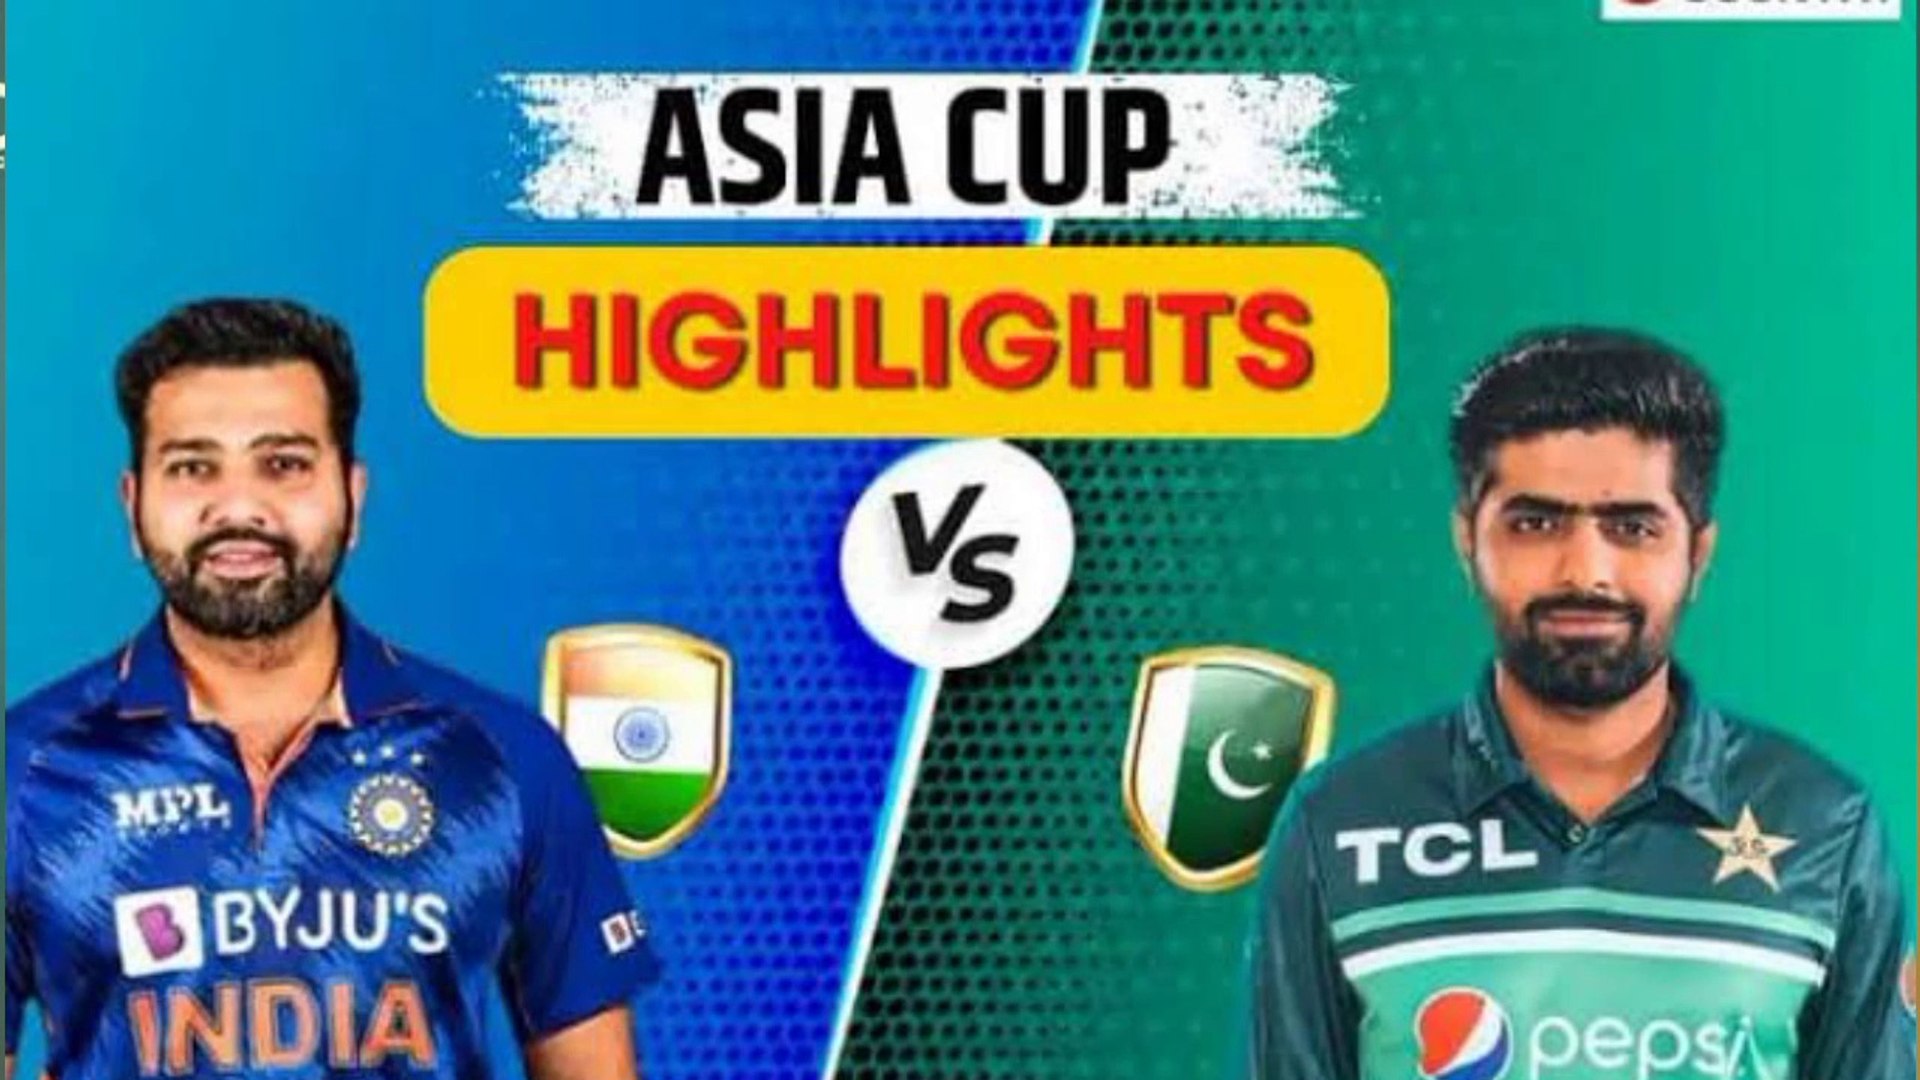 India vs Pakistan Asia Cup Super 4 Full Match Highlights